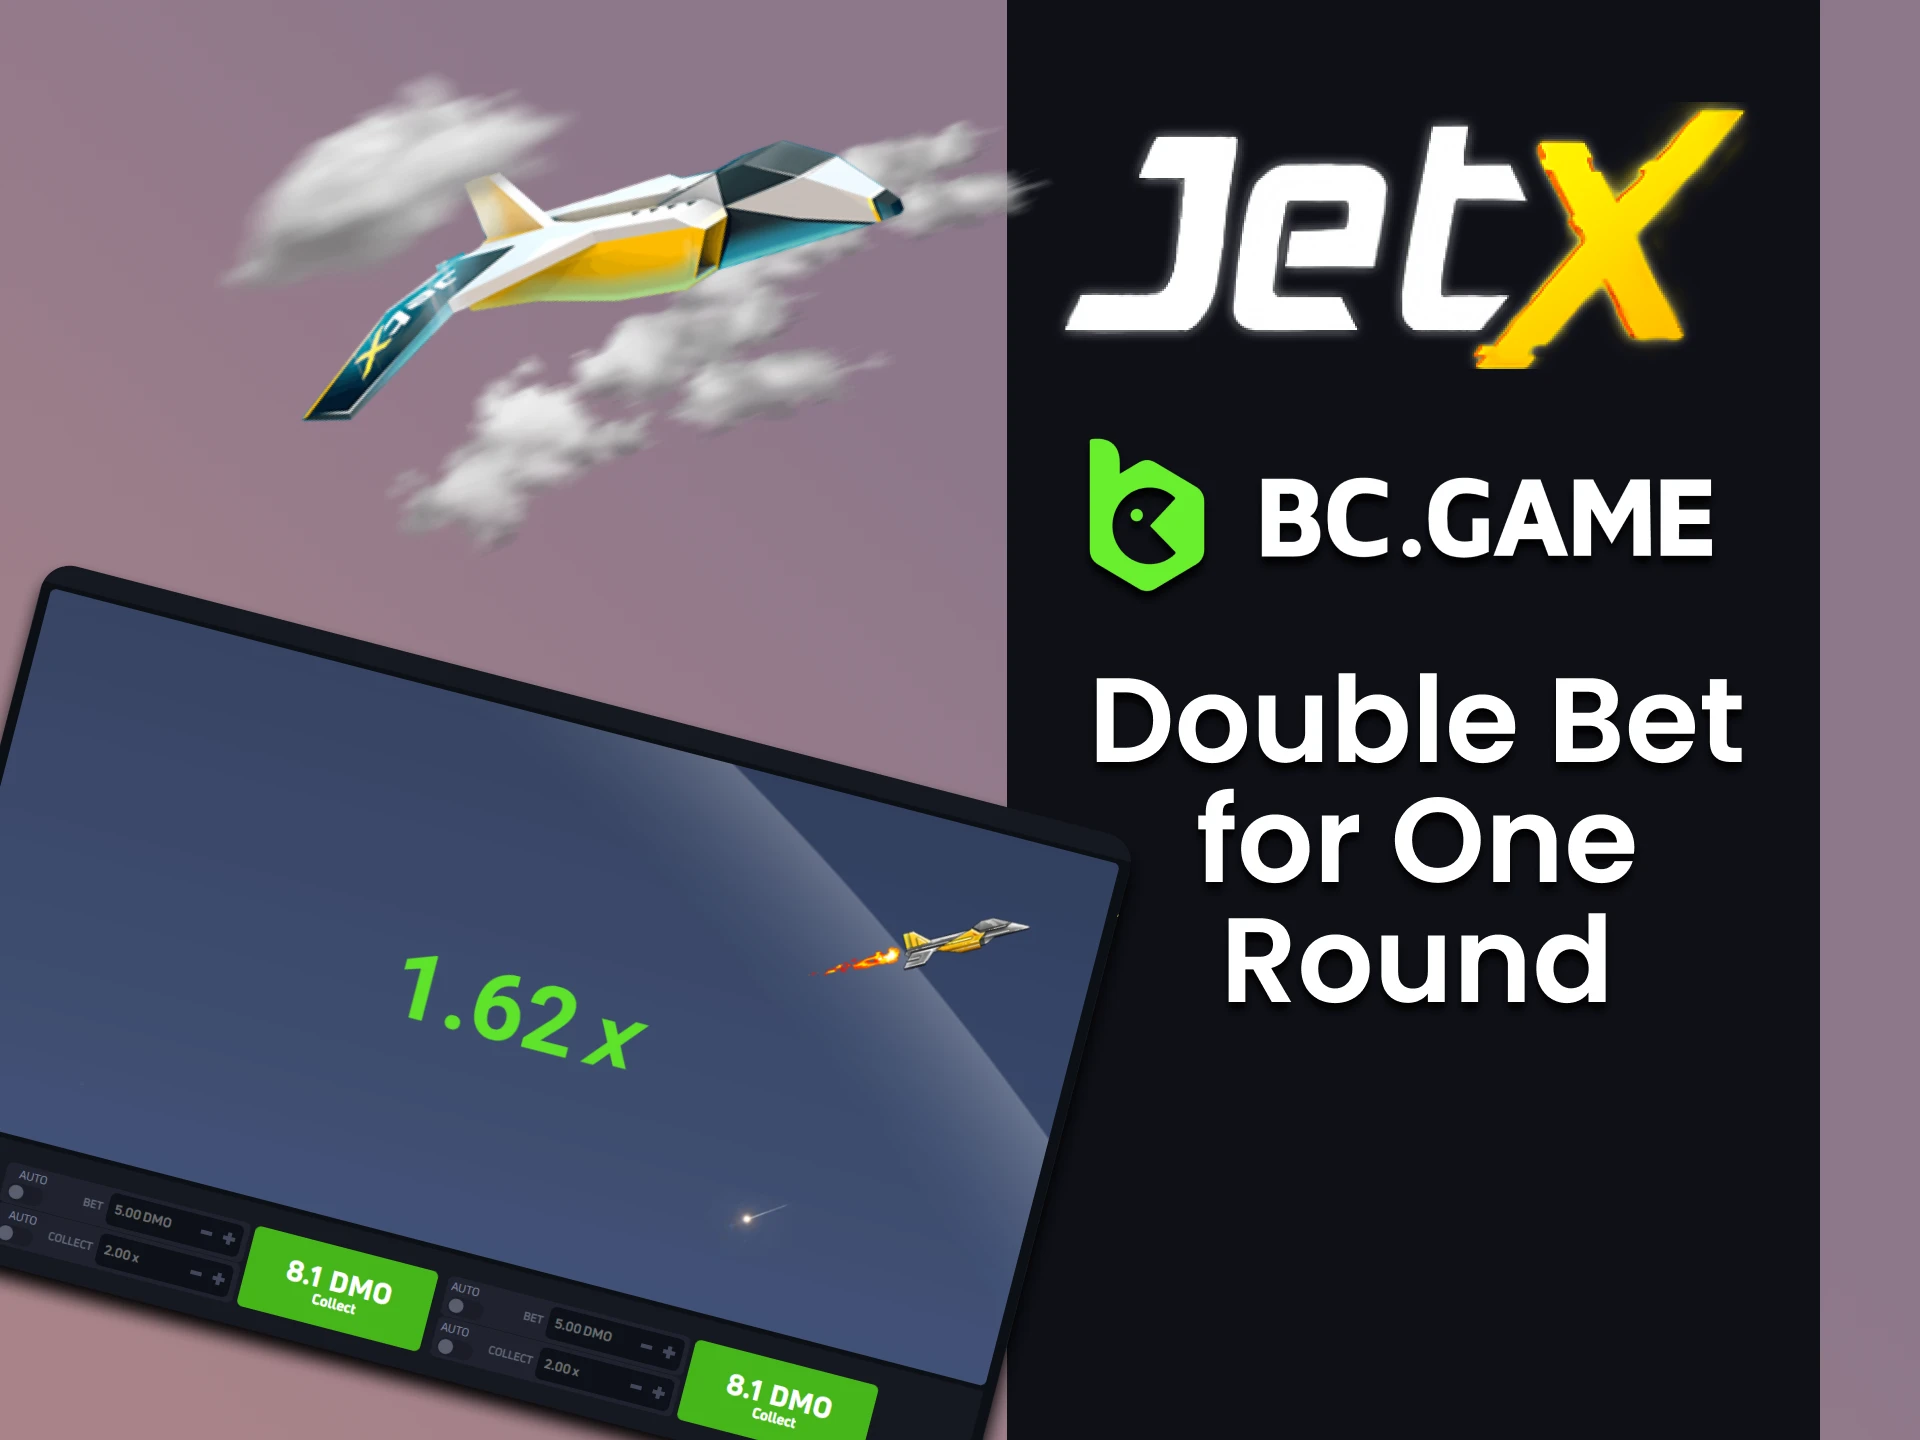 You can choose a two-bet strategy in BC Game's JetX game.